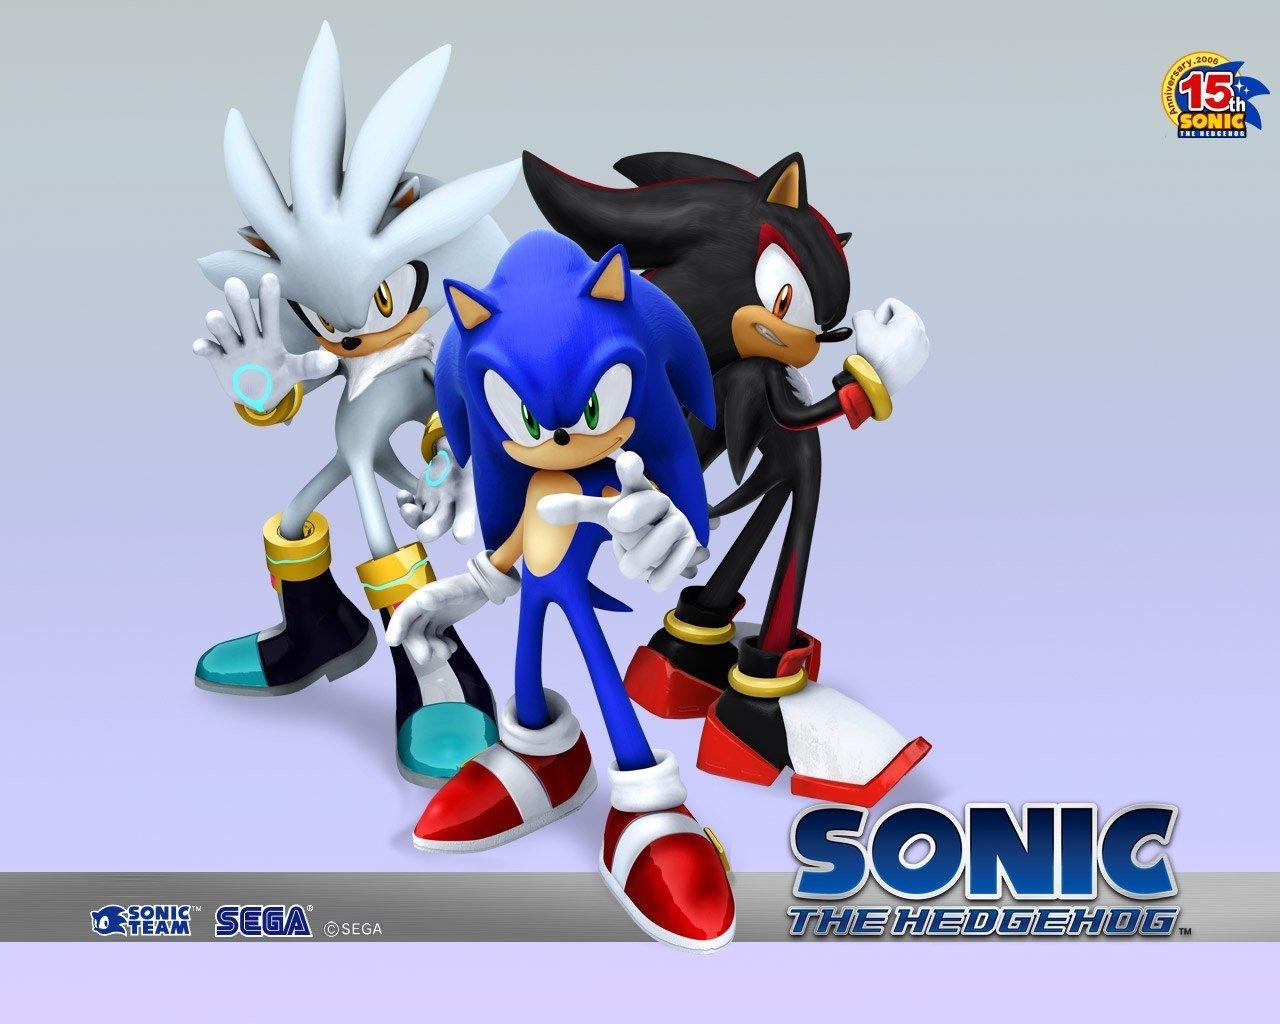 Sonic the Hedgehog (2006) HD Wallpaper and Background Image